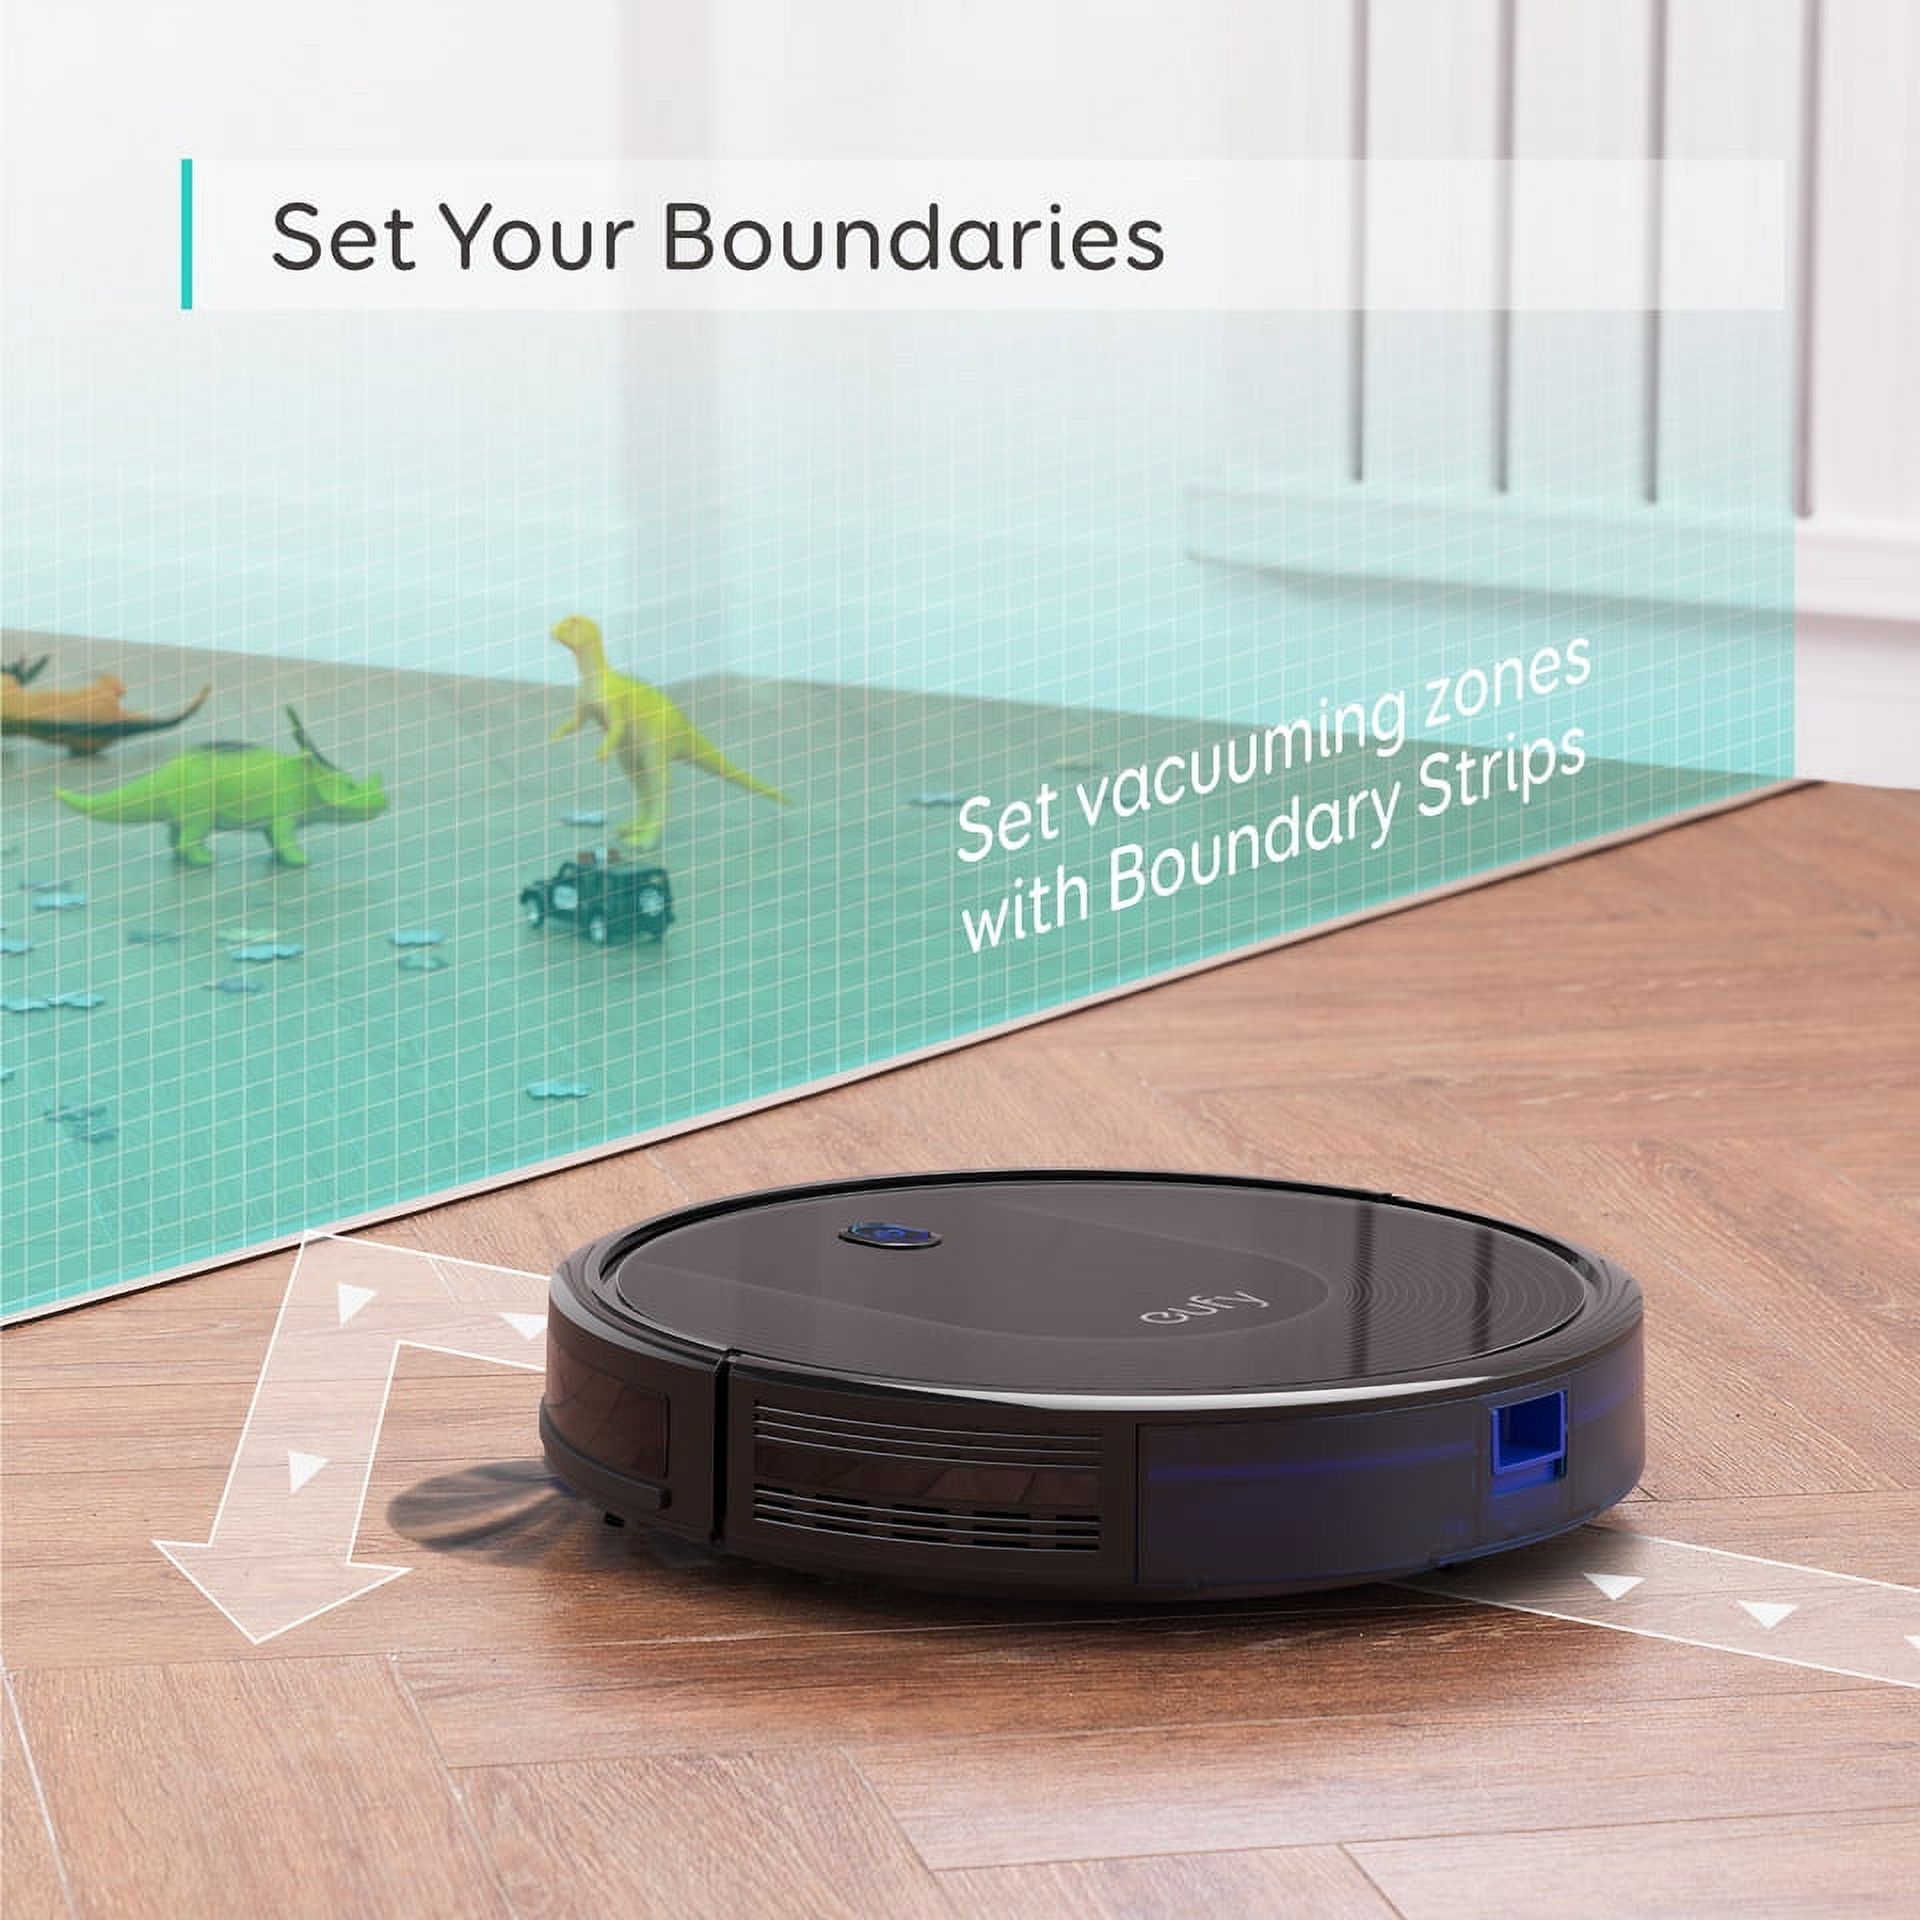 eufy BoostIQ RoboVac 30, Robot Vacuum Cleaner, Upgraded, Super-Thin, 1500Pa Strong Suction, 13ft Boundary Strips Included, Quiet, Self-Charging, Cleans Hard Floors to Medium-Pile Carpets - image 3 of 7